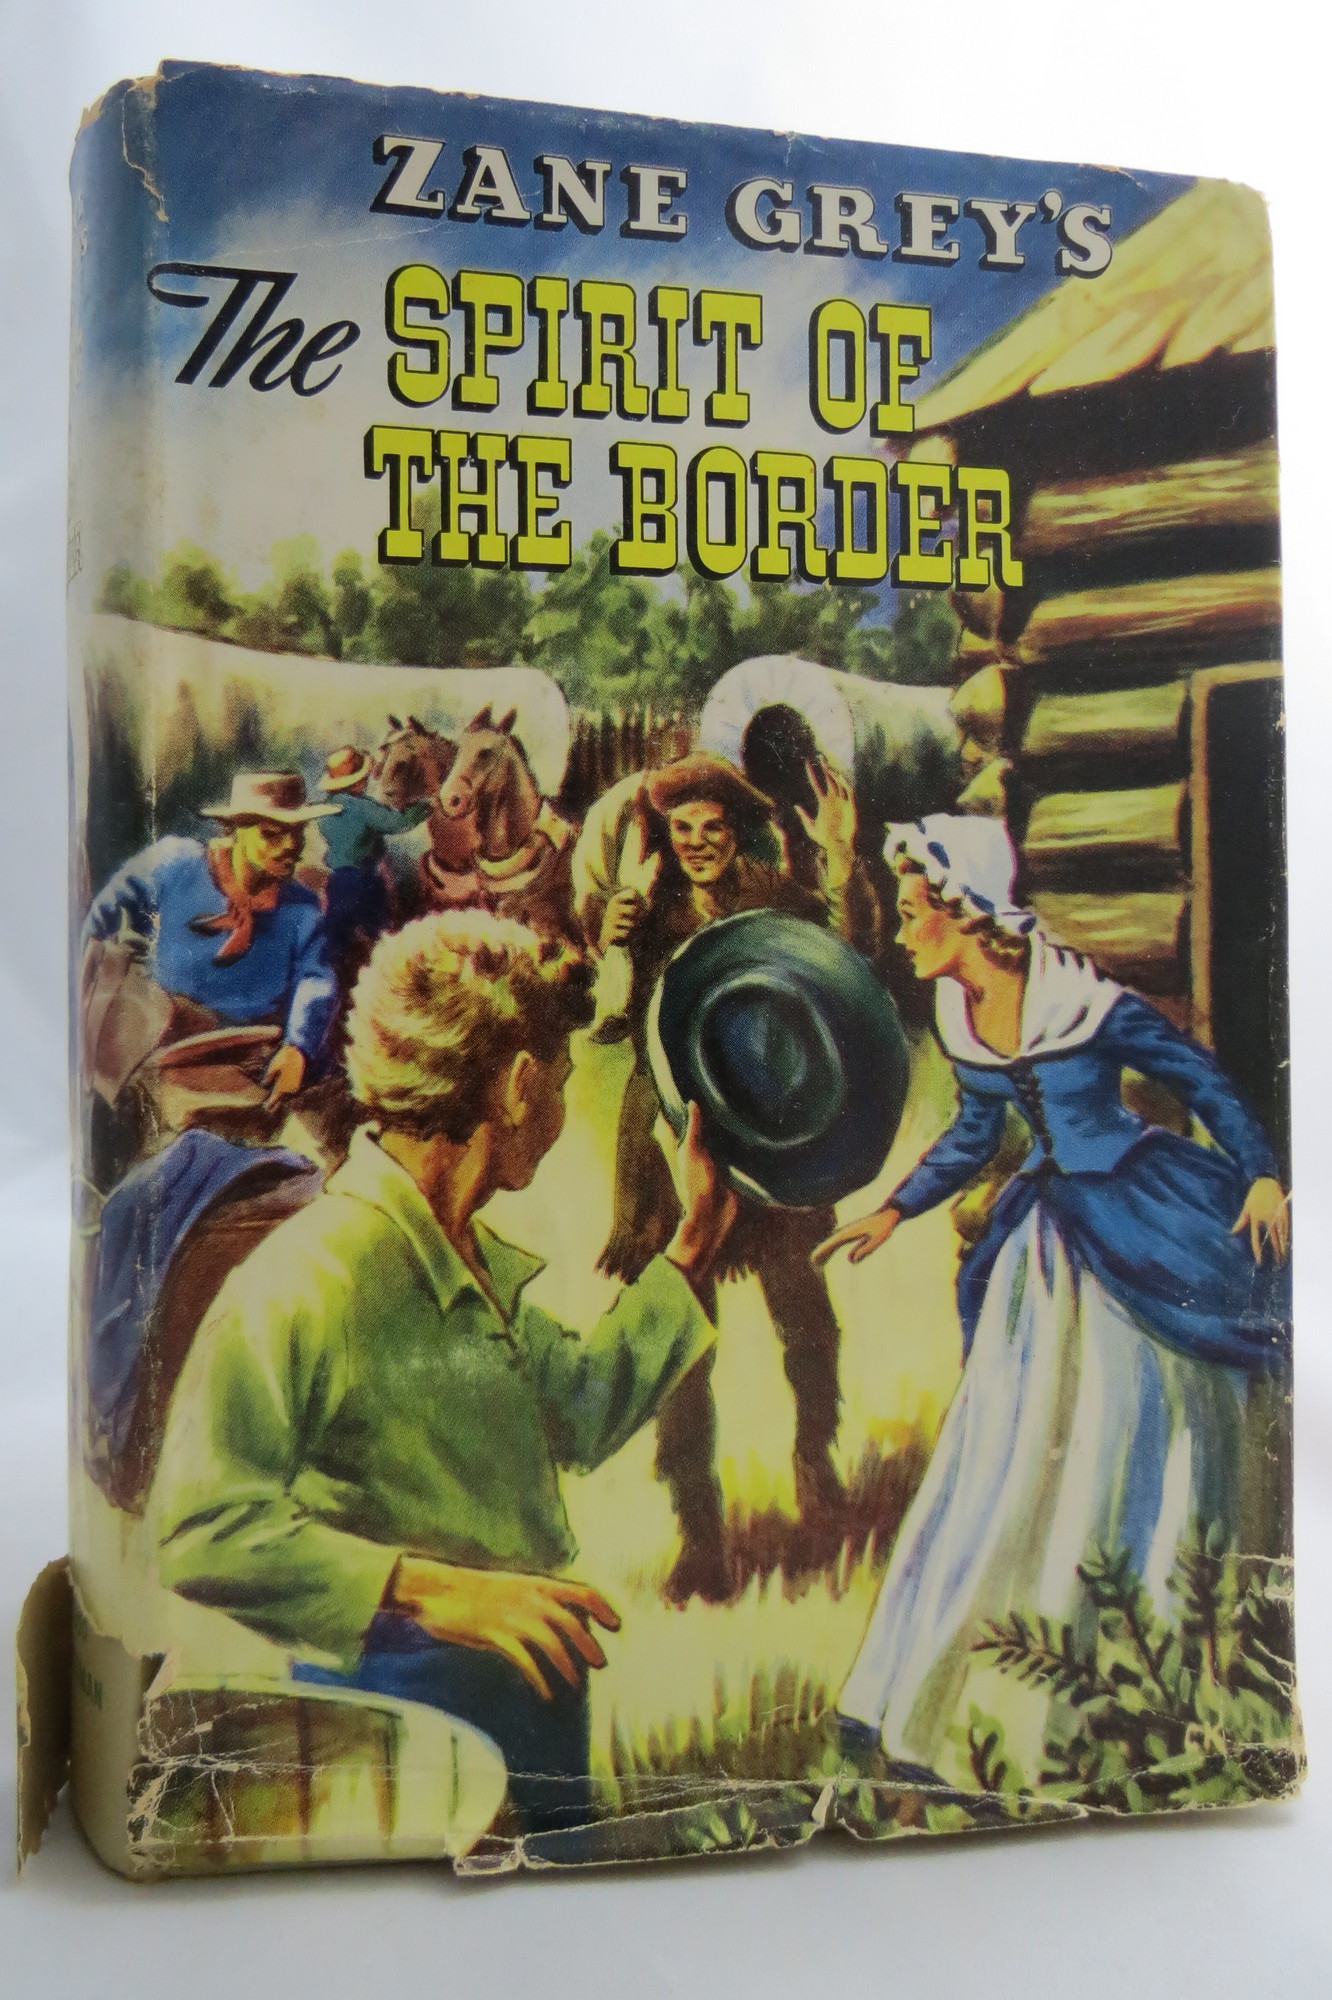 Image for ZANE GREY'S THE SPIRIT OF THE BORDER (DJ protected by a brand new, clear, acid-free mylar cover)